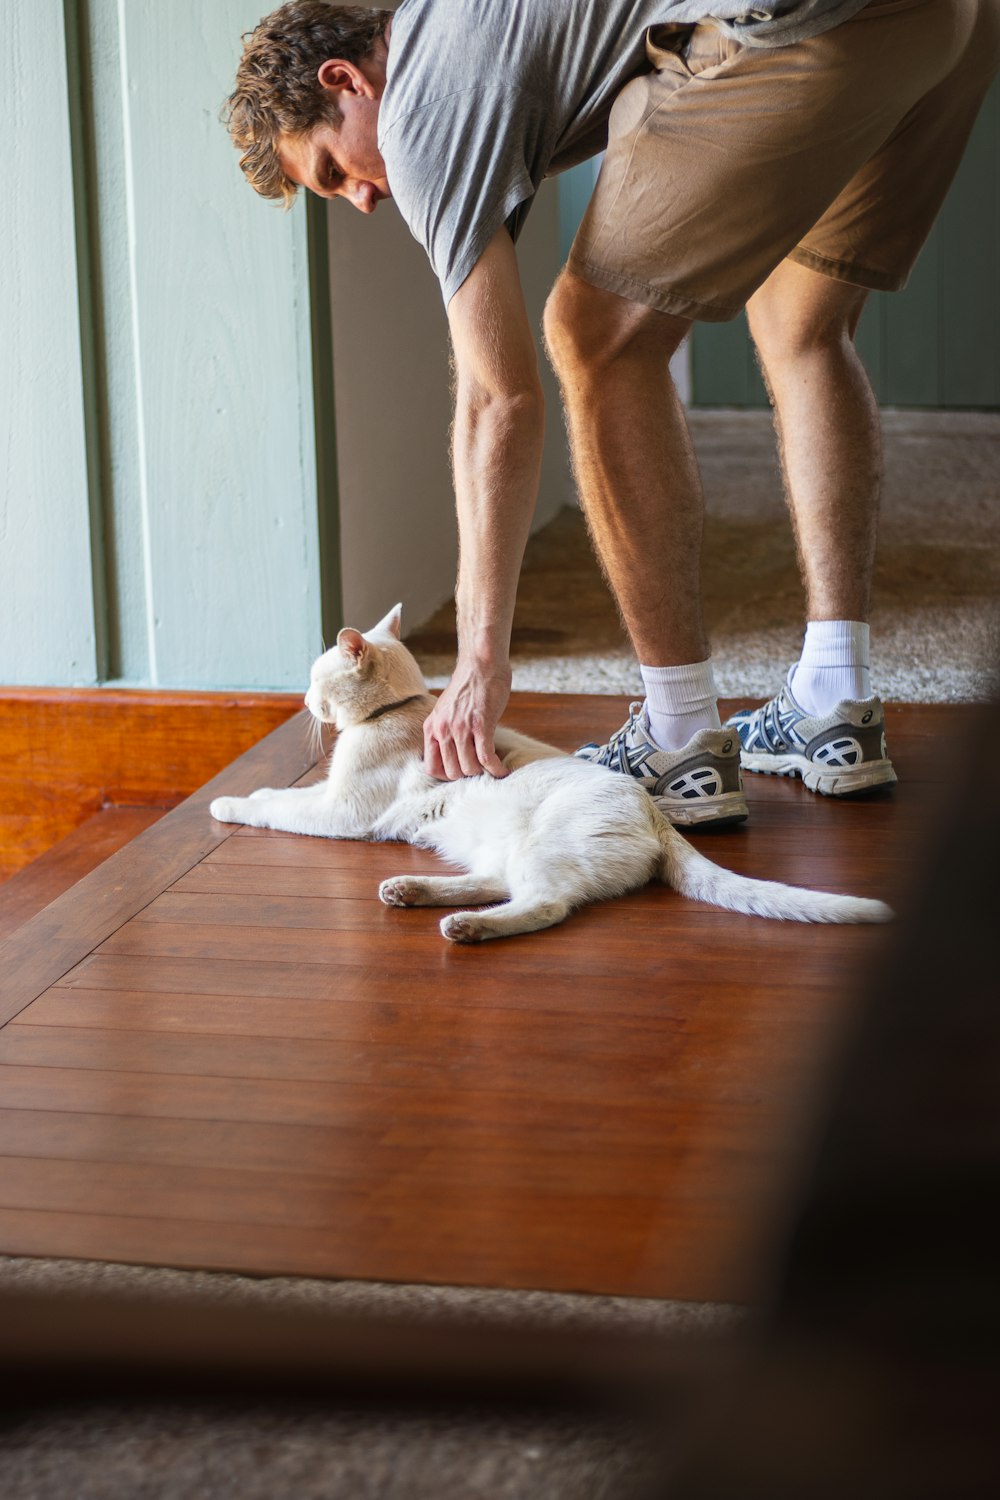 a man playing with a cat on the floor